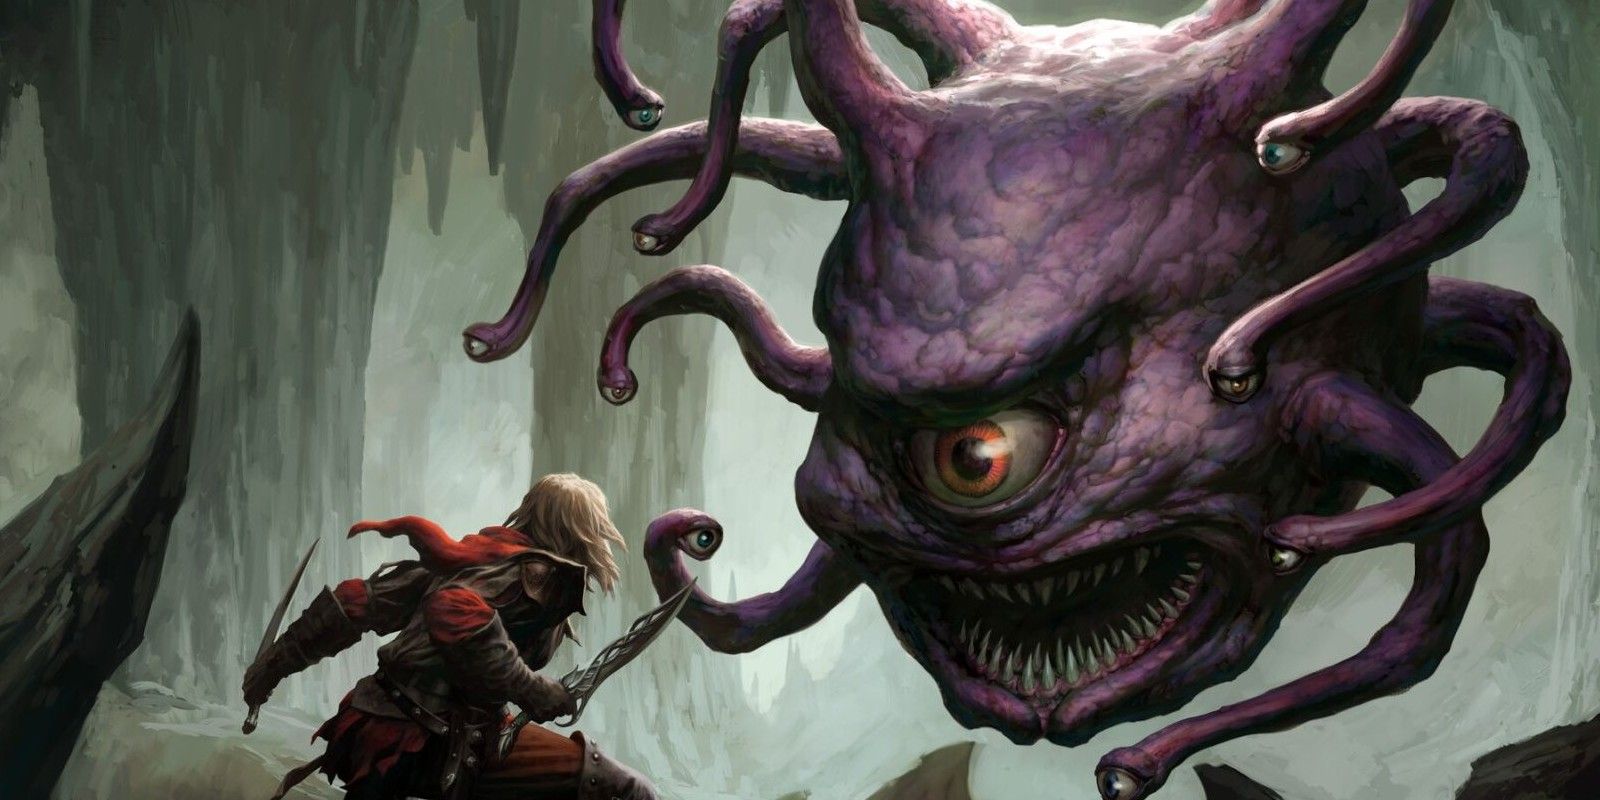 Dungeons Dragons Sanity Rules Are Sadistic Beholder Aberration Image